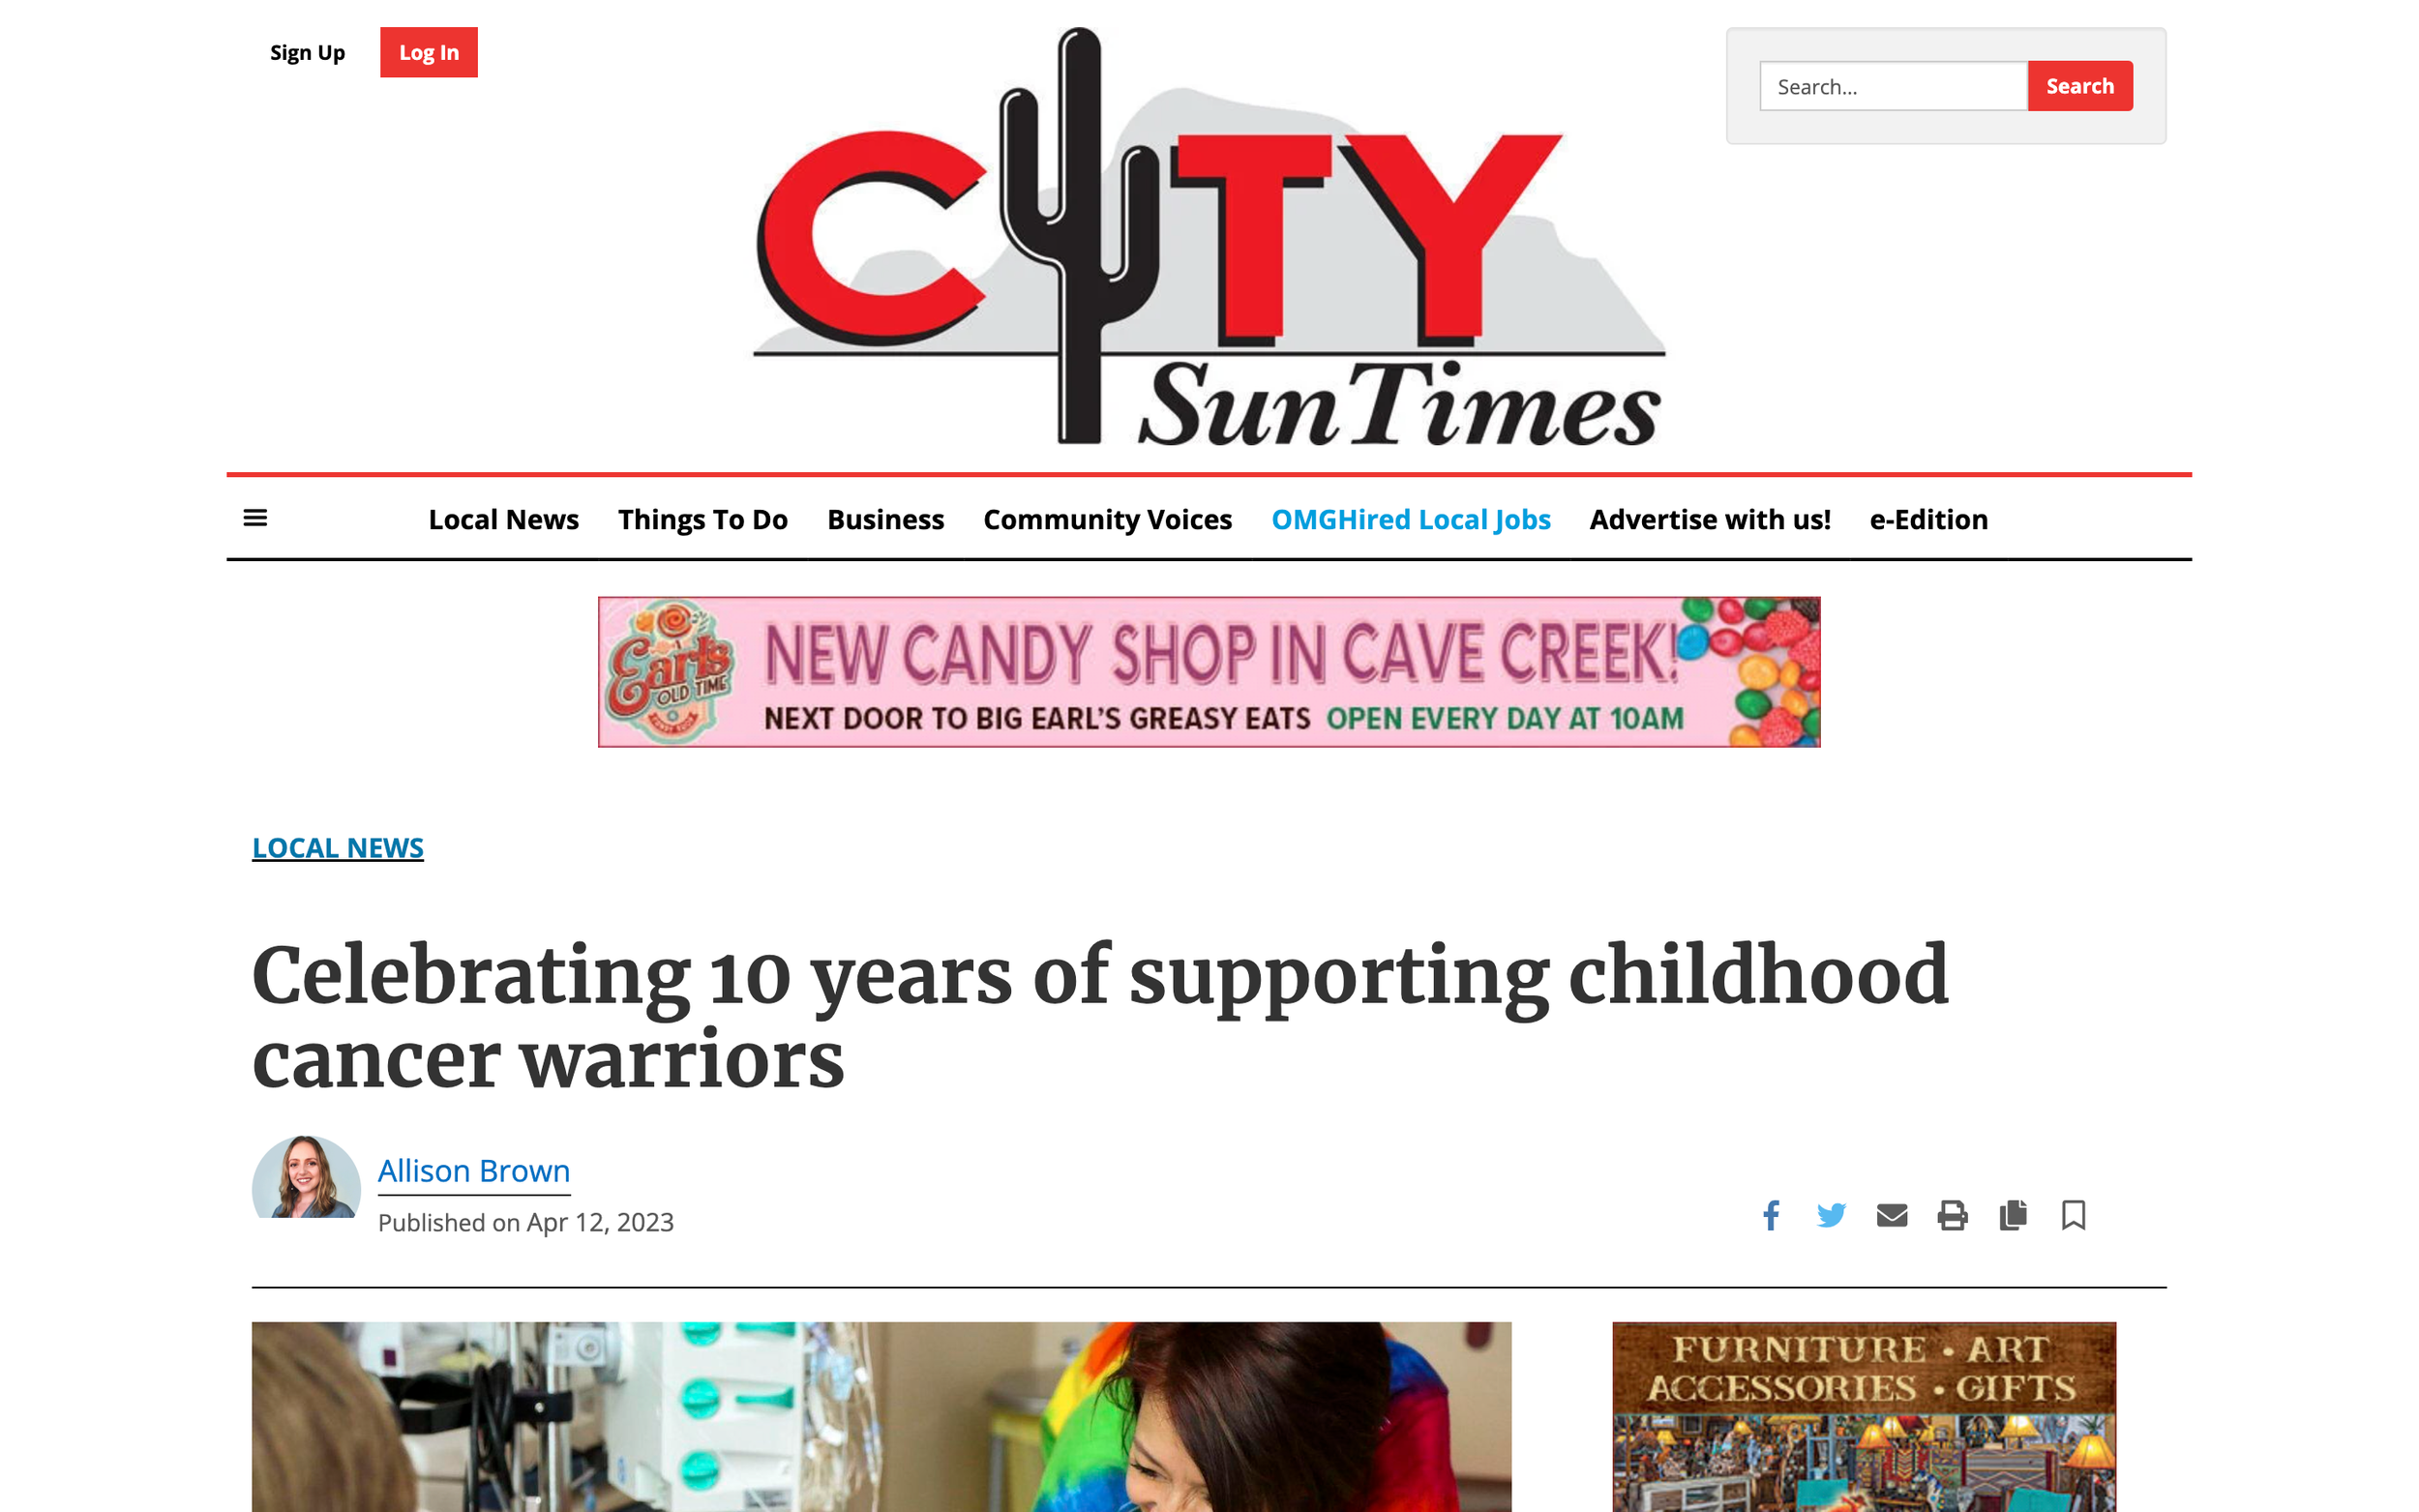 City Sun Times: Celebrating 10 years of supporting childhood cancer warriors (Copy)